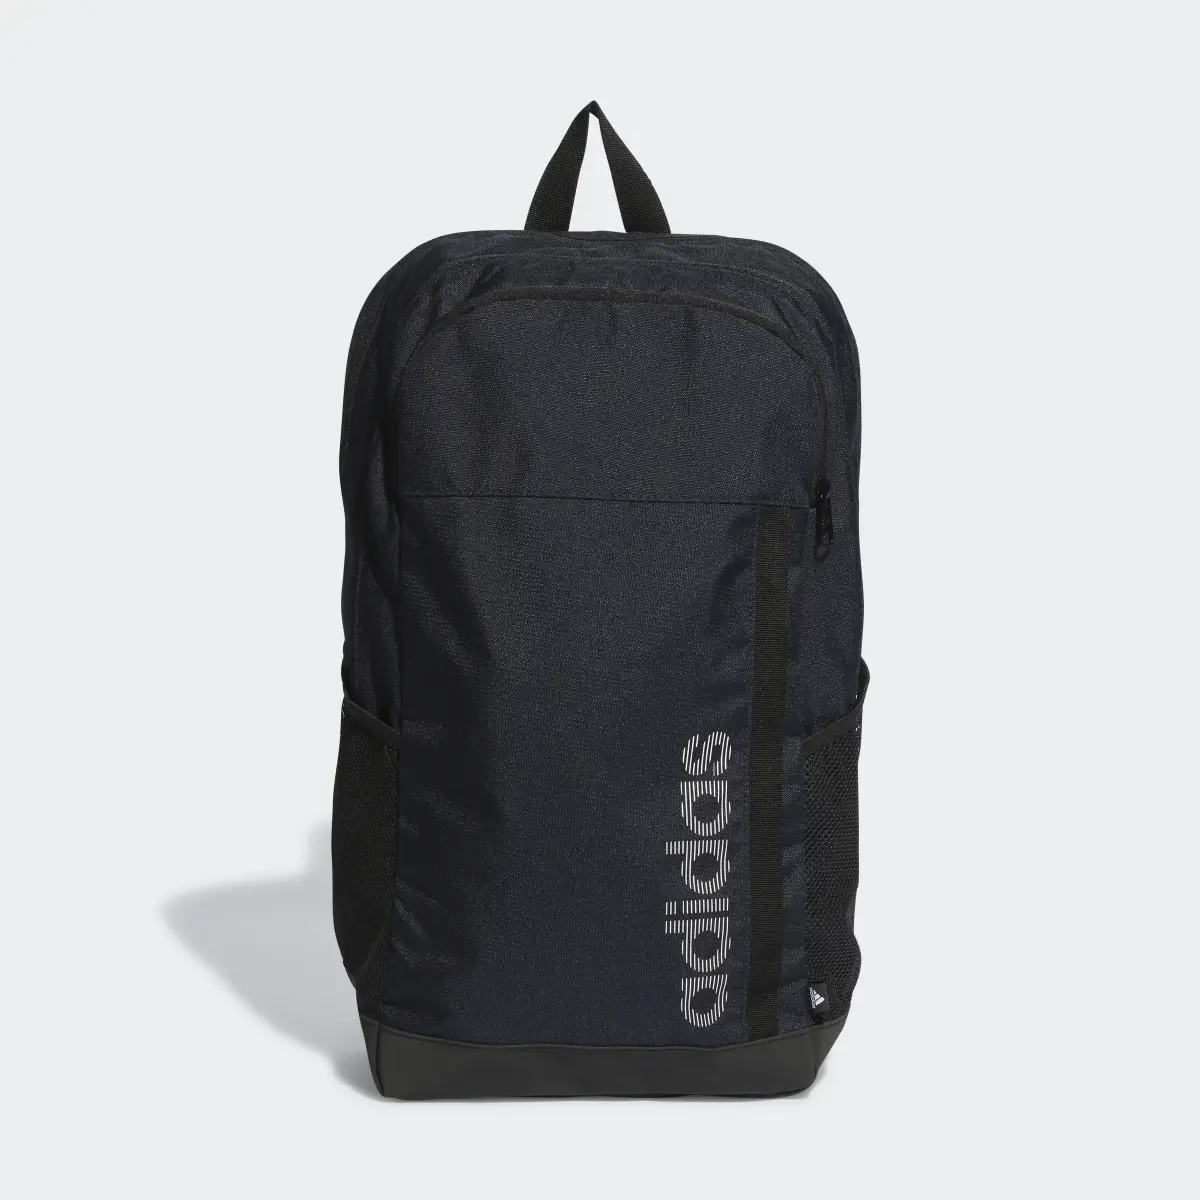 Adidas Motion Linear Backpack. 2